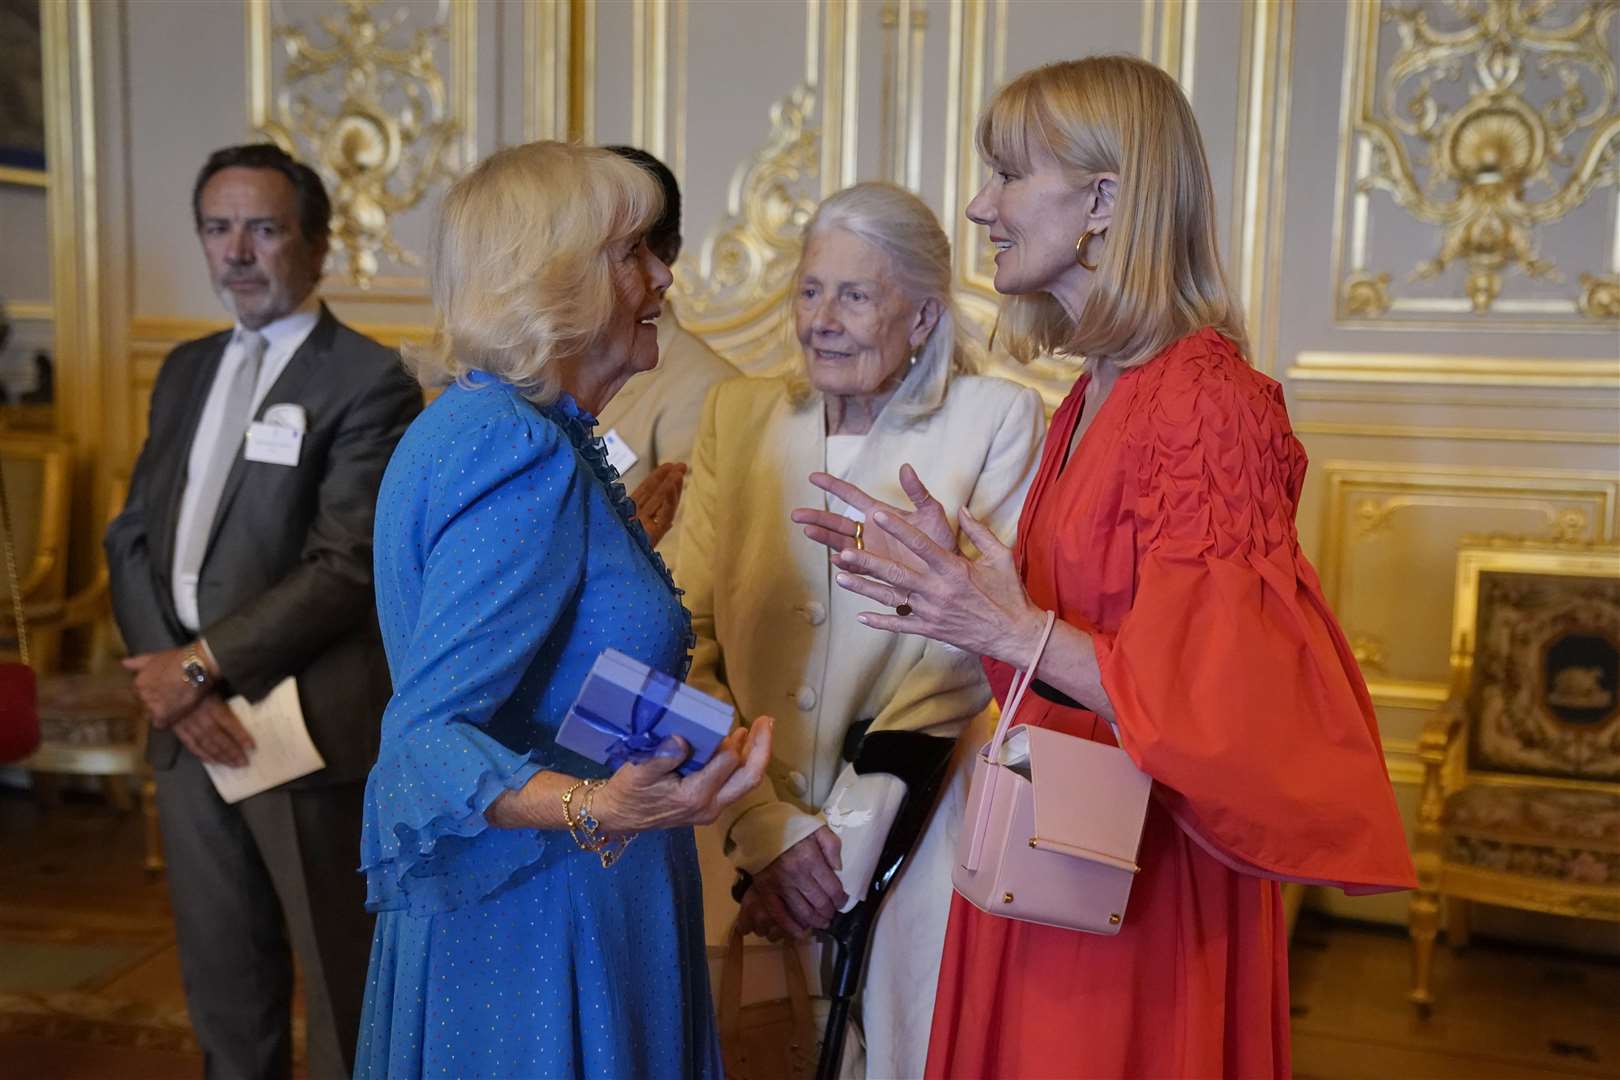 The Queen speaks to Joely Richardson, right, and Vanessa Redgrave, second right, during a reception at Windsor Castle (Andrew Matthews/PA)